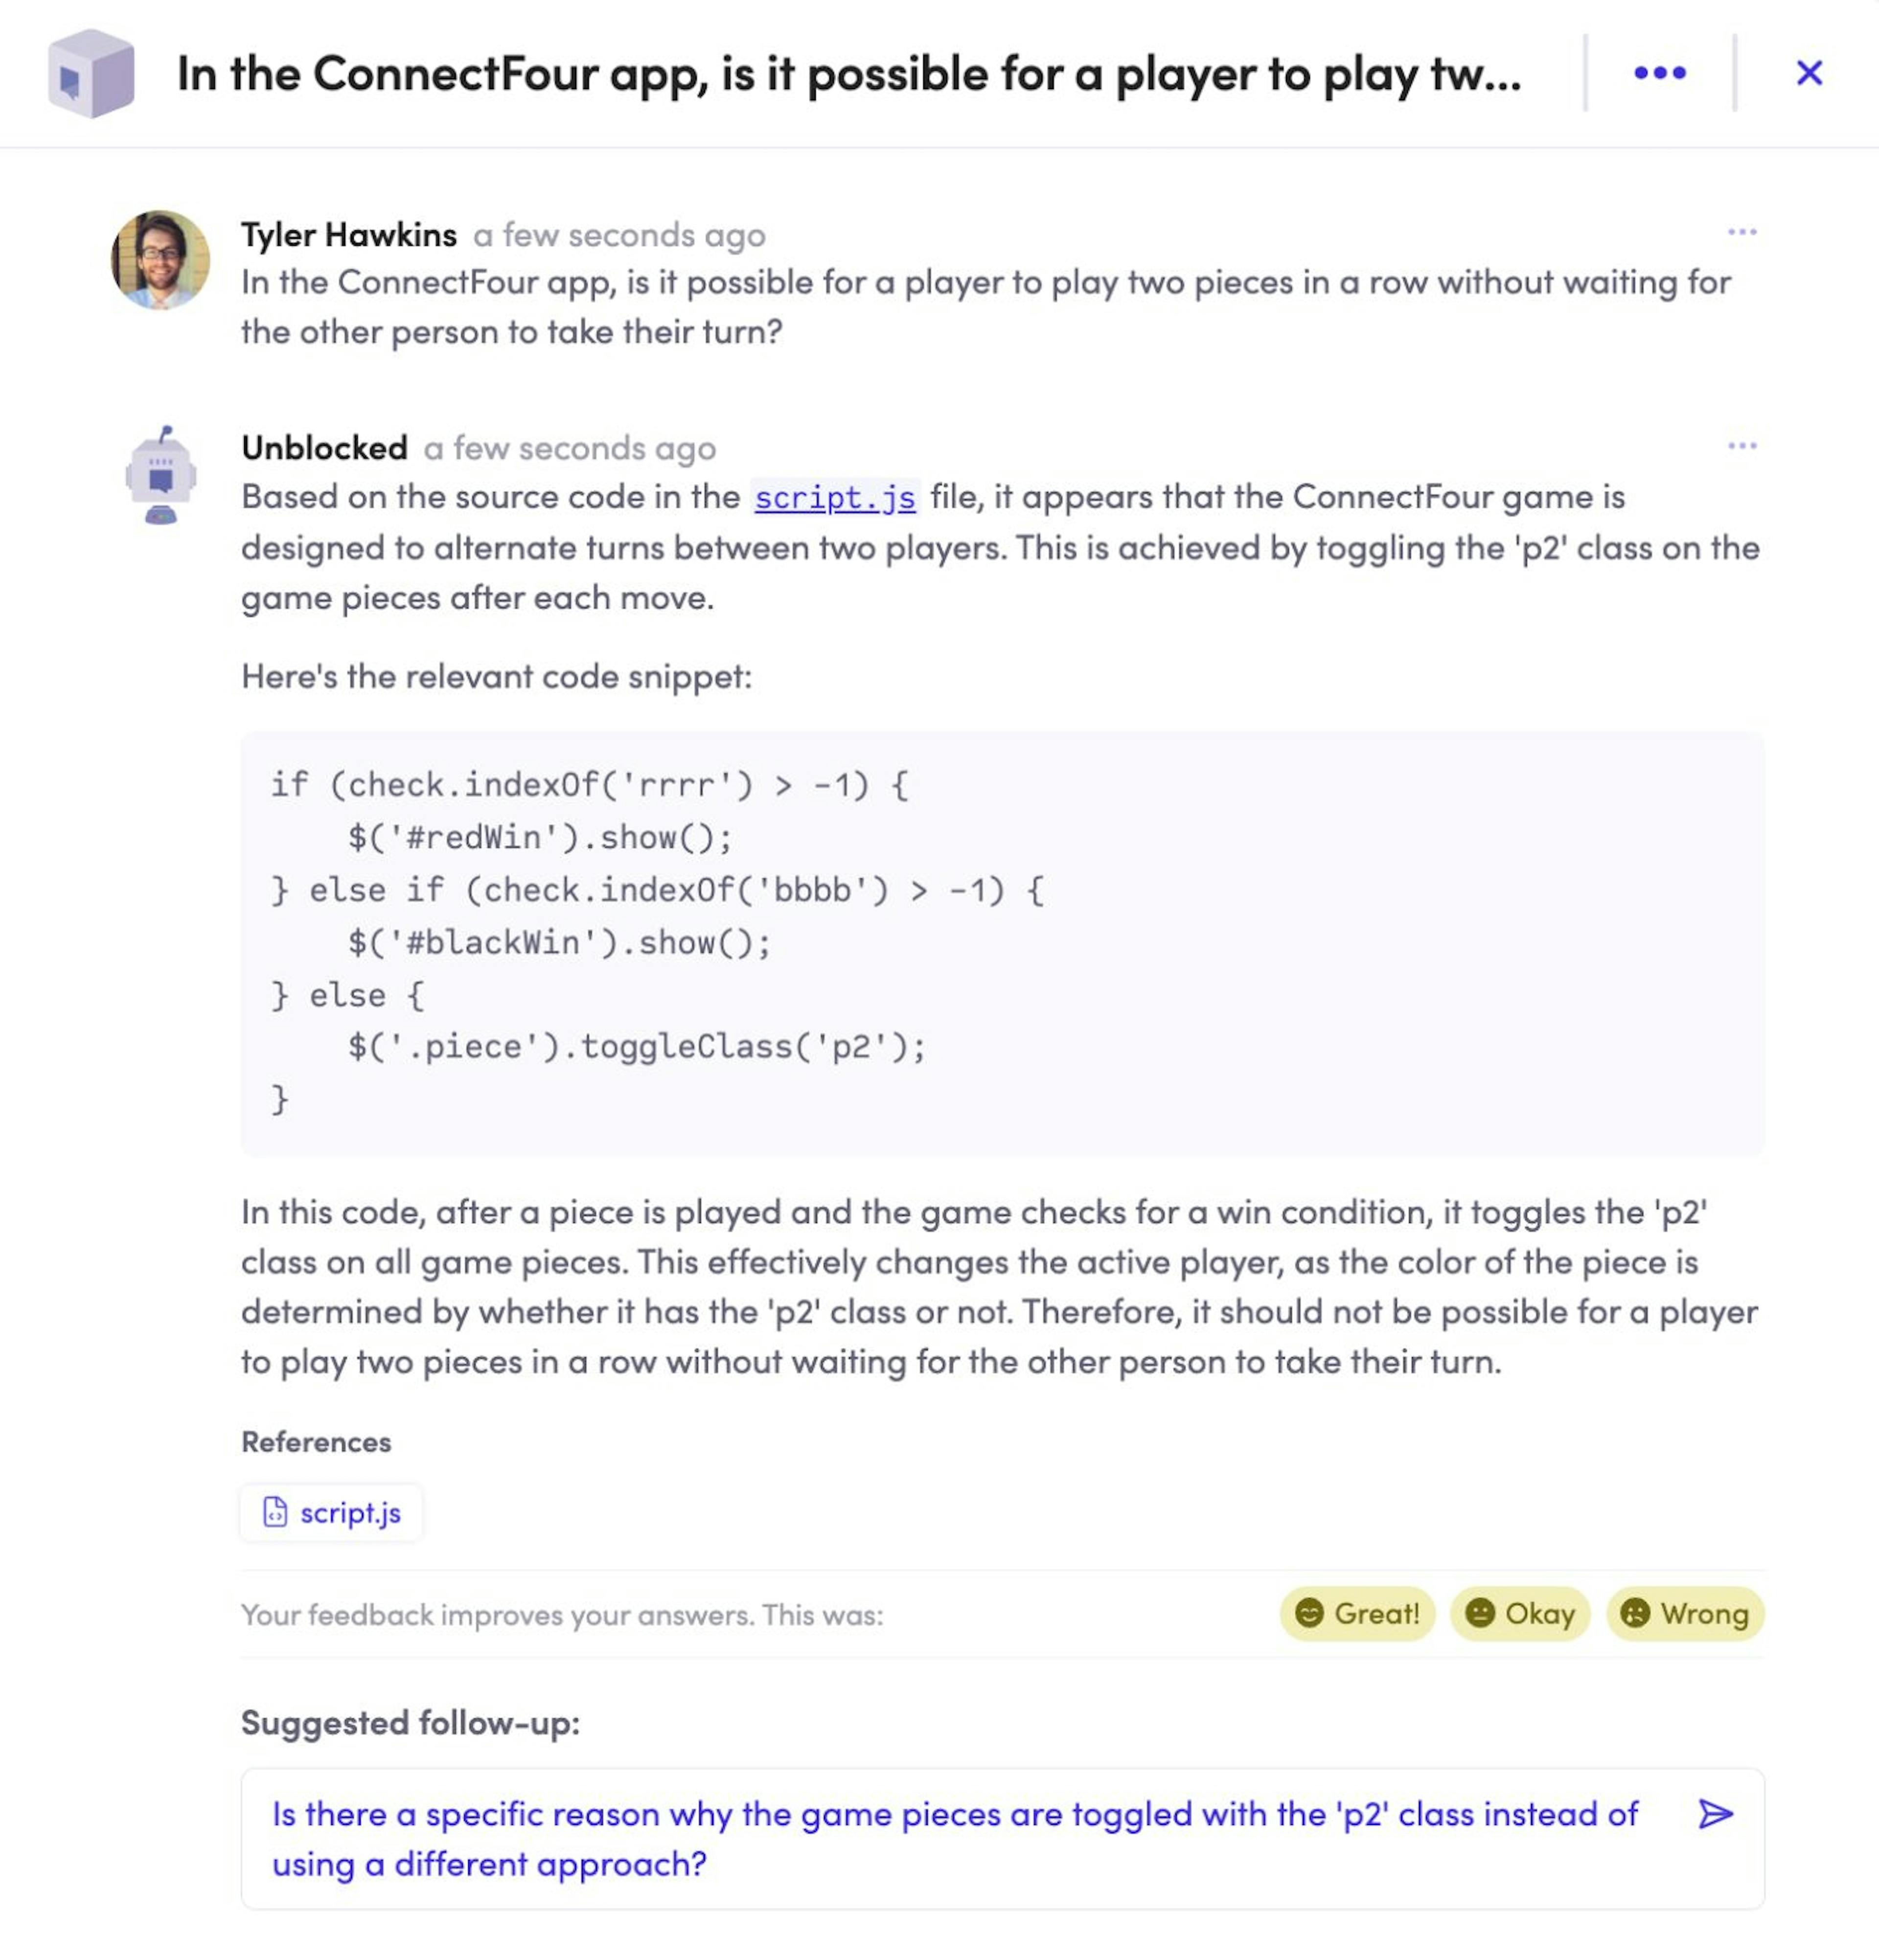 Question and answer for “In the ConnectFour app, is it possible for a player to play two pieces in a row without waiting for the other person to take their turn?”